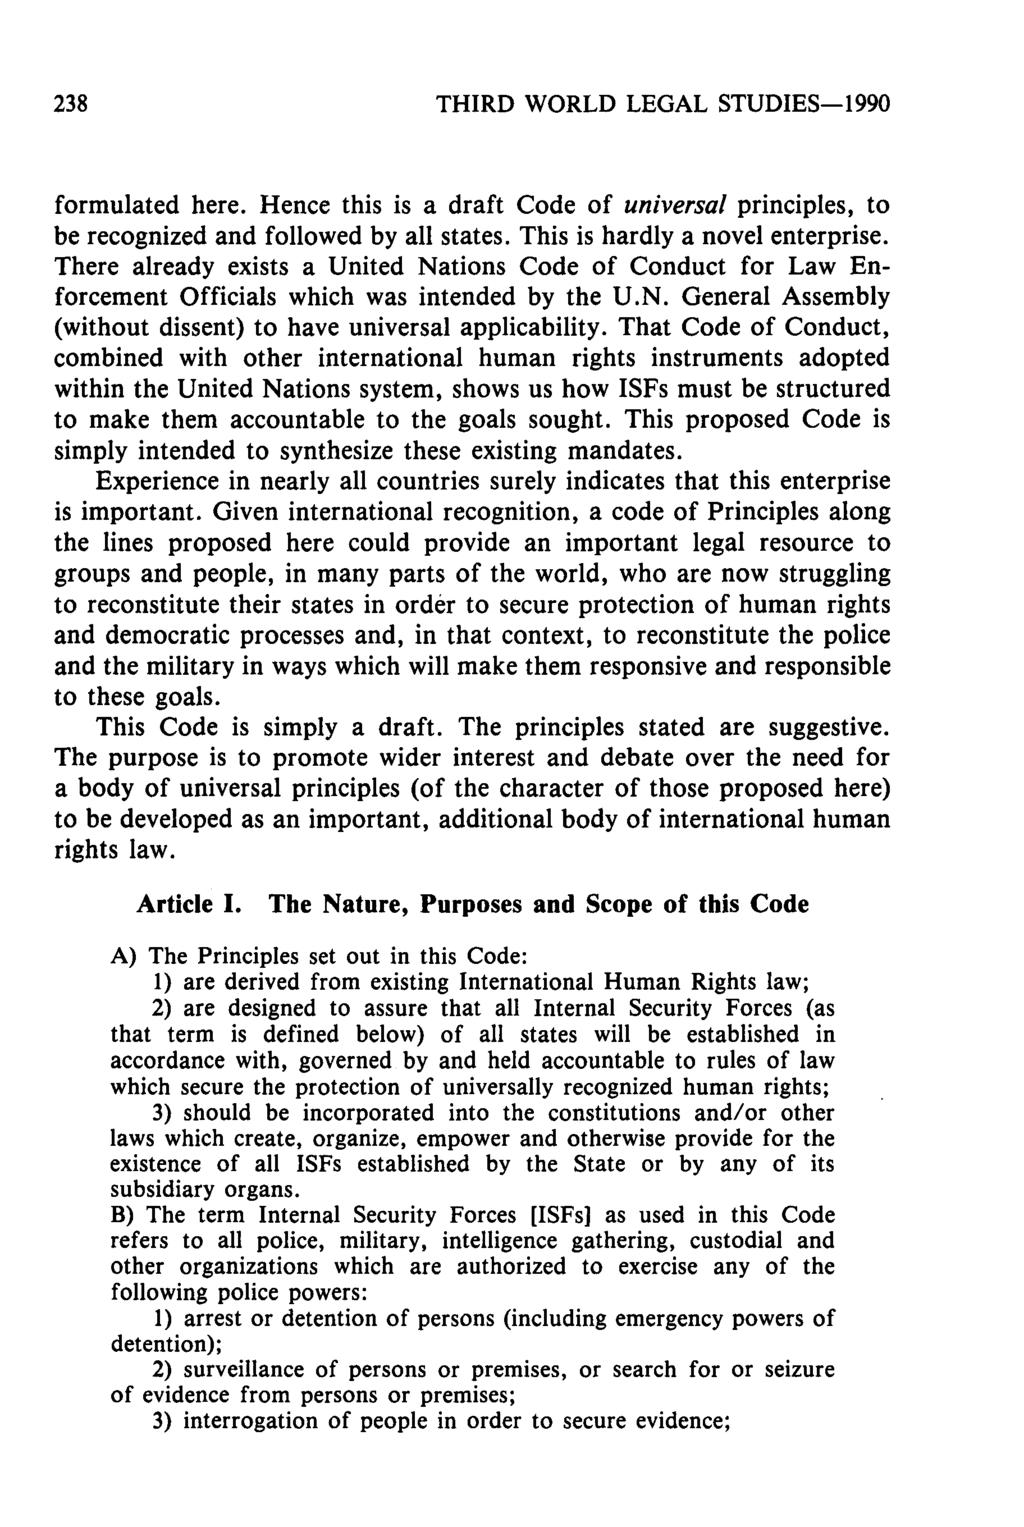 THIRD WORLD LEGAL STUDIES-1990 formulated here. Hence this is a draft Code of universal principles, to be recognized and followed by all states. This is hardly a novel enterprise.